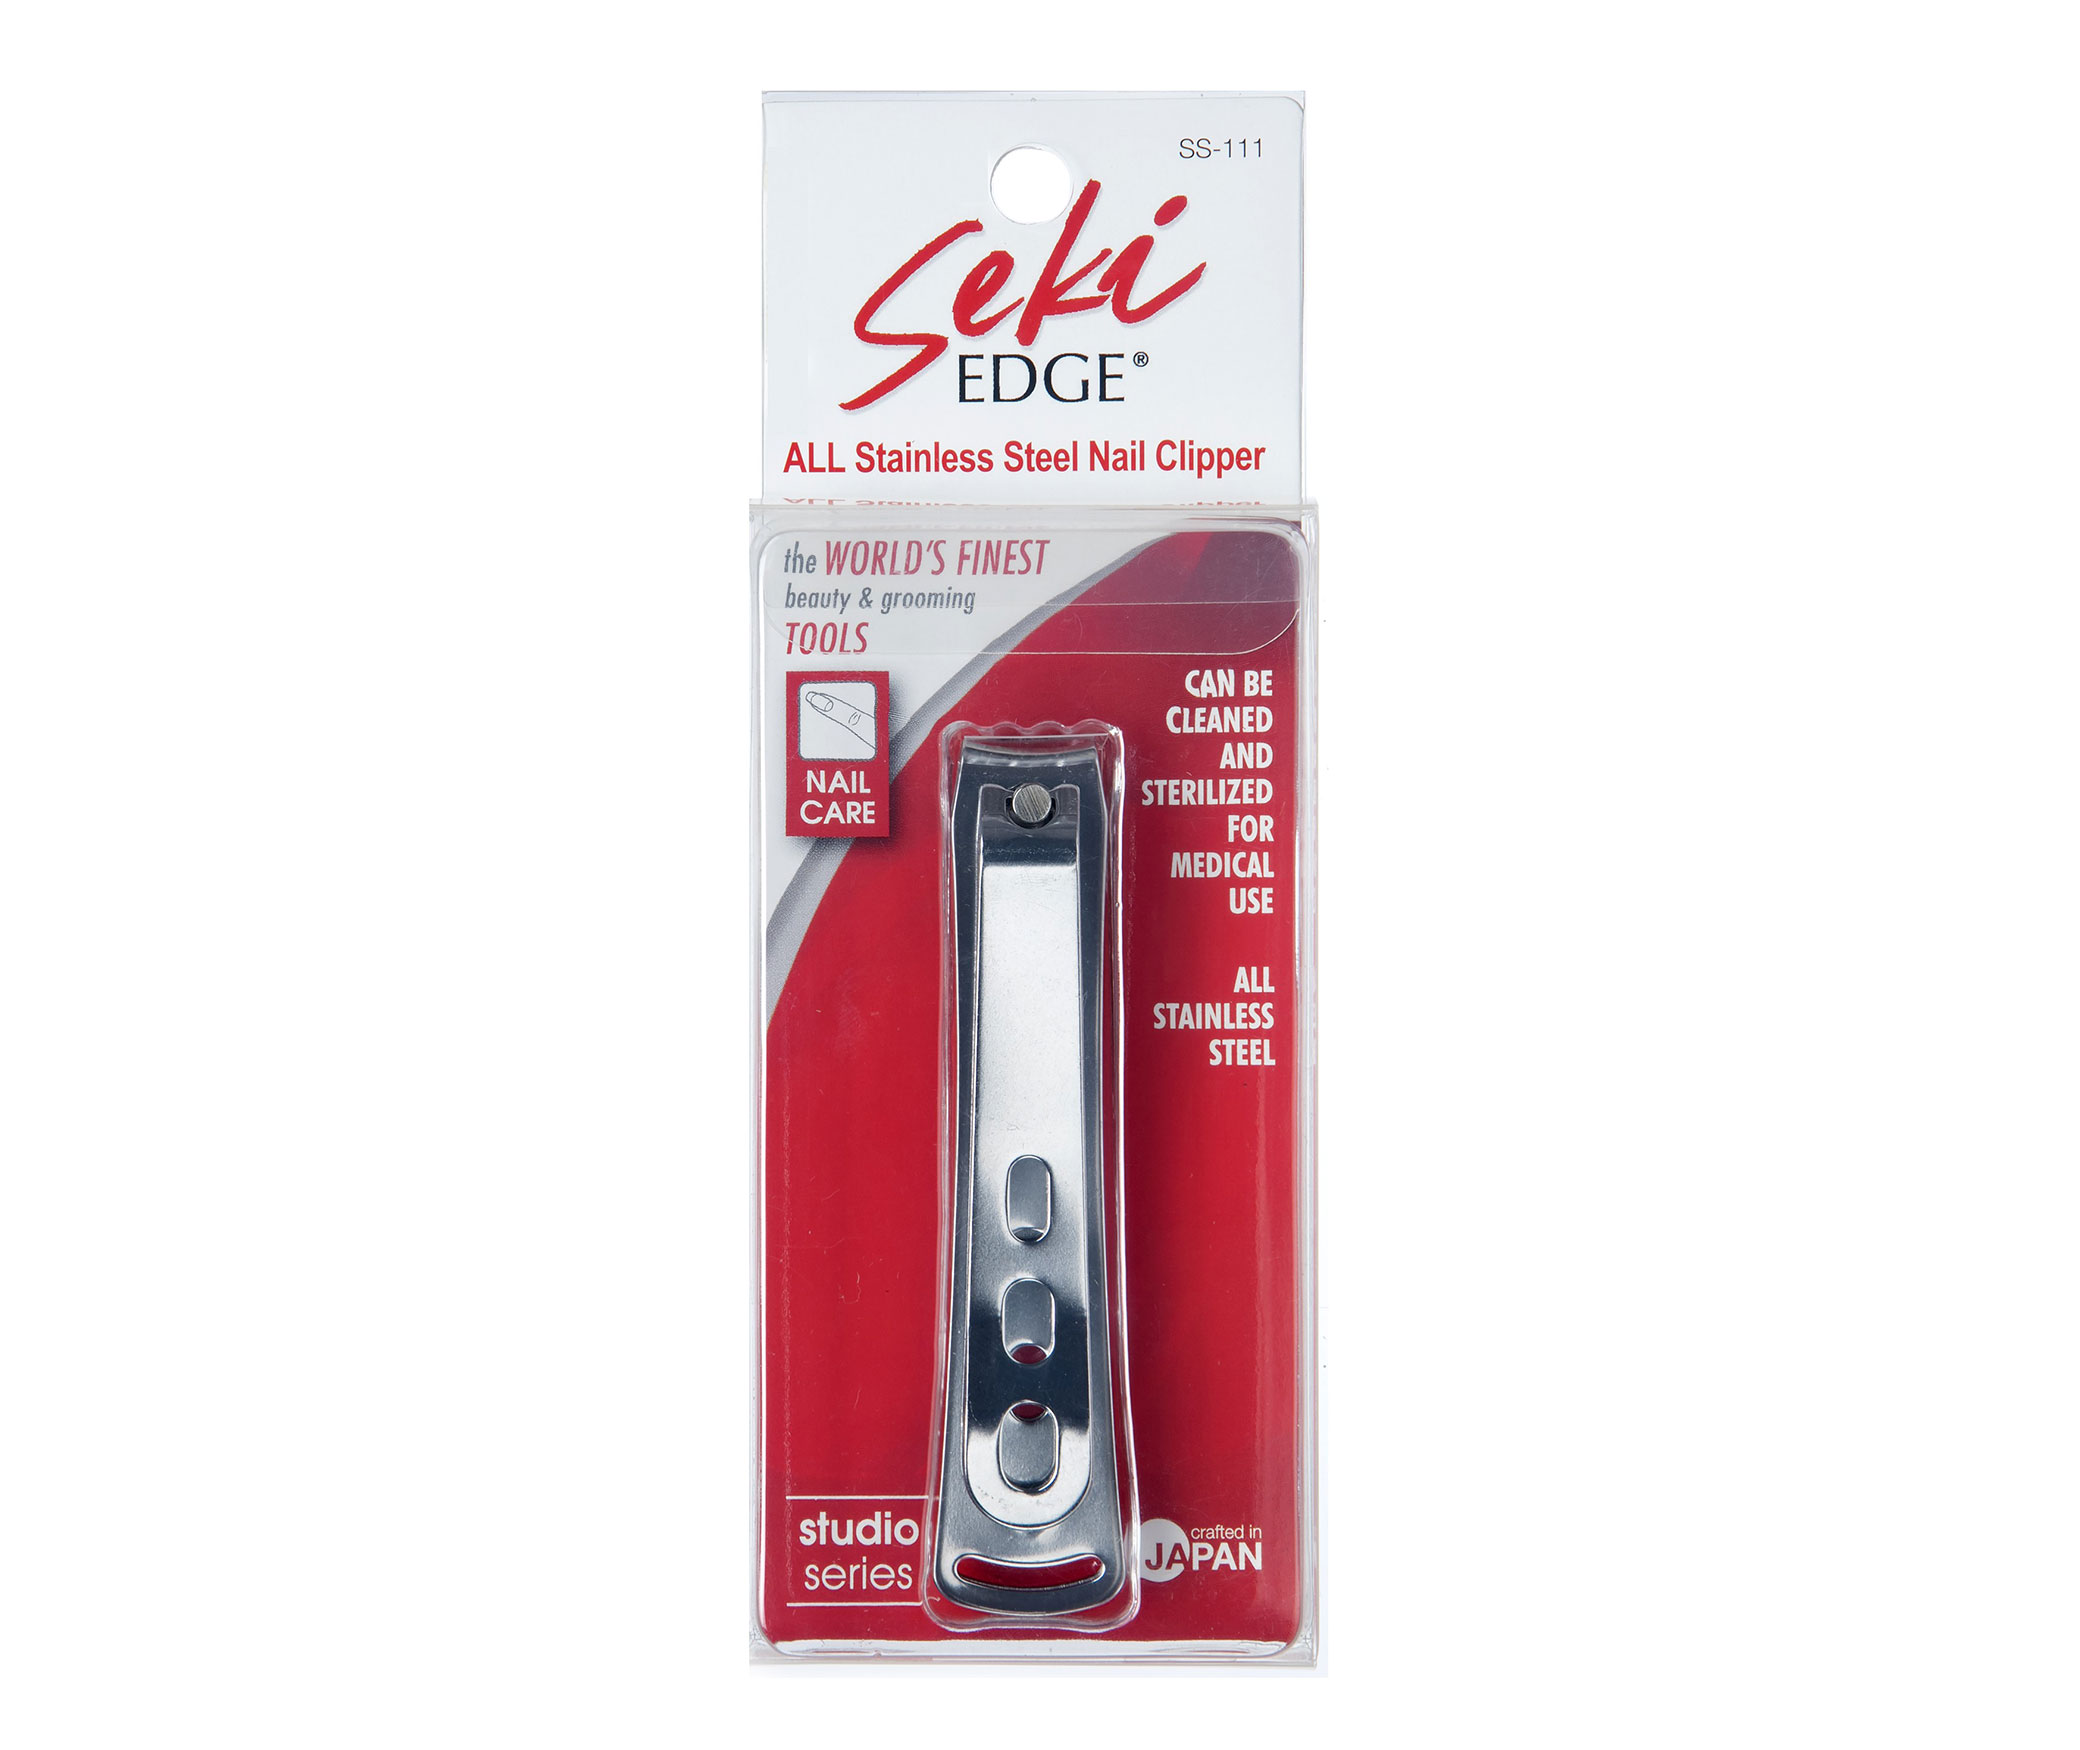 Seki Edge ALL Stainless Steel Nail Clipper (SS-111) package